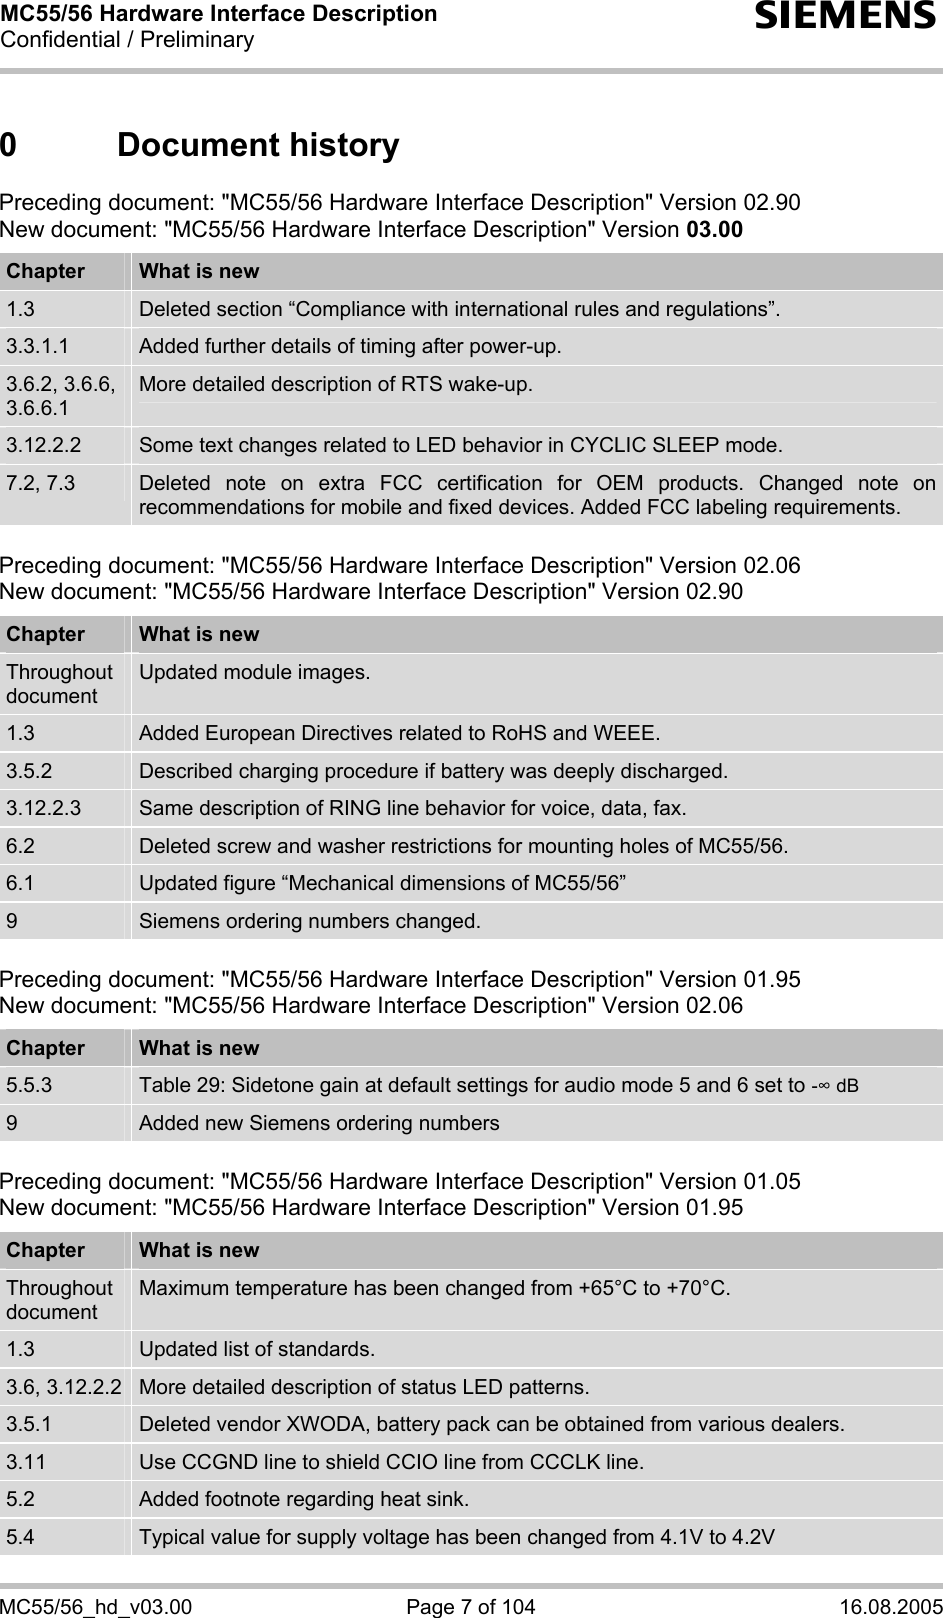 MC55/56 Hardware Interface Description Confidential / Preliminary s MC55/56_hd_v03.00  Page 7 of 104  16.08.2005 0 Document history Preceding document: &quot;MC55/56 Hardware Interface Description&quot; Version 02.90 New document: &quot;MC55/56 Hardware Interface Description&quot; Version 03.00  Chapter  What is new 1.3  Deleted section “Compliance with international rules and regulations”. 3.3.1.1  Added further details of timing after power-up. 3.6.2, 3.6.6, 3.6.6.1 More detailed description of RTS wake-up. 3.12.2.2  Some text changes related to LED behavior in CYCLIC SLEEP mode. 7.2, 7.3  Deleted note on extra FCC certification for OEM products. Changed note on recommendations for mobile and fixed devices. Added FCC labeling requirements.  Preceding document: &quot;MC55/56 Hardware Interface Description&quot; Version 02.06 New document: &quot;MC55/56 Hardware Interface Description&quot; Version 02.90  Chapter  What is new Throughout document Updated module images. 1.3  Added European Directives related to RoHS and WEEE. 3.5.2  Described charging procedure if battery was deeply discharged. 3.12.2.3  Same description of RING line behavior for voice, data, fax. 6.2  Deleted screw and washer restrictions for mounting holes of MC55/56. 6.1  Updated figure “Mechanical dimensions of MC55/56” 9  Siemens ordering numbers changed.  Preceding document: &quot;MC55/56 Hardware Interface Description&quot; Version 01.95 New document: &quot;MC55/56 Hardware Interface Description&quot; Version 02.06  Chapter  What is new 5.5.3  Table 29: Sidetone gain at default settings for audio mode 5 and 6 set to - dB 9  Added new Siemens ordering numbers  Preceding document: &quot;MC55/56 Hardware Interface Description&quot; Version 01.05 New document: &quot;MC55/56 Hardware Interface Description&quot; Version 01.95  Chapter  What is new Throughout document Maximum temperature has been changed from +65°C to +70°C. 1.3  Updated list of standards. 3.6, 3.12.2.2  More detailed description of status LED patterns. 3.5.1  Deleted vendor XWODA, battery pack can be obtained from various dealers. 3.11  Use CCGND line to shield CCIO line from CCCLK line. 5.2  Added footnote regarding heat sink. 5.4  Typical value for supply voltage has been changed from 4.1V to 4.2V 